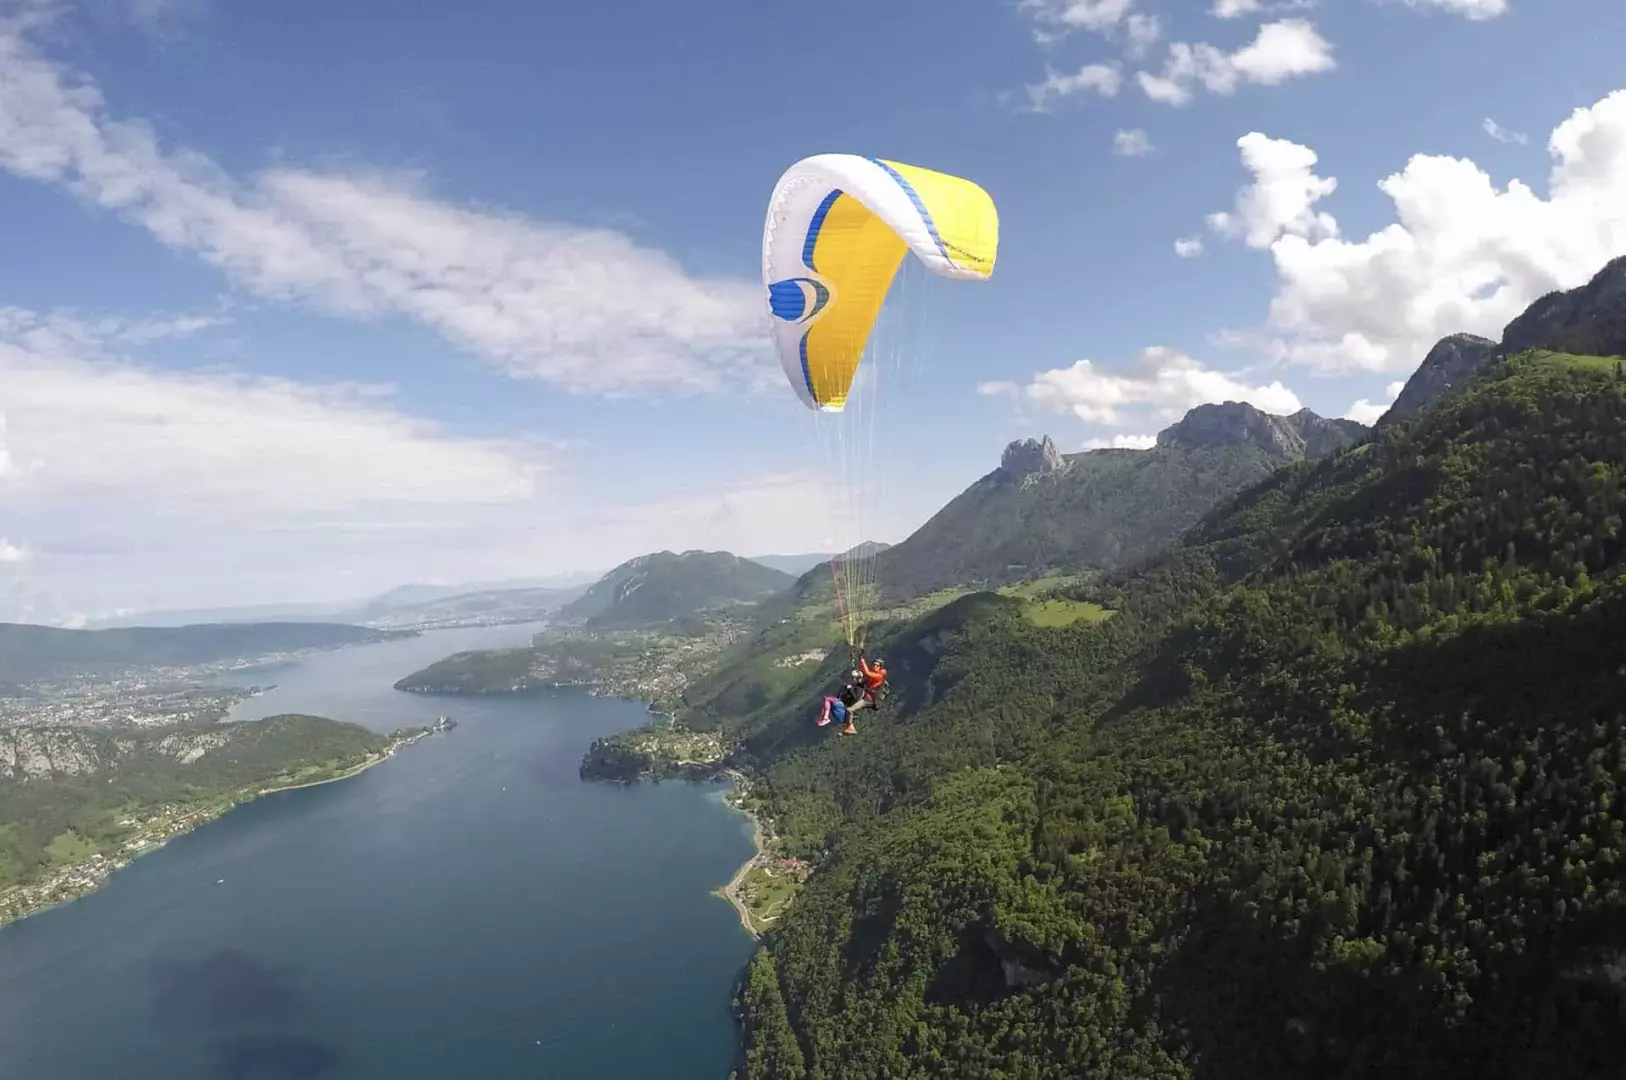 The ideal weather conditions for a paragliding flight